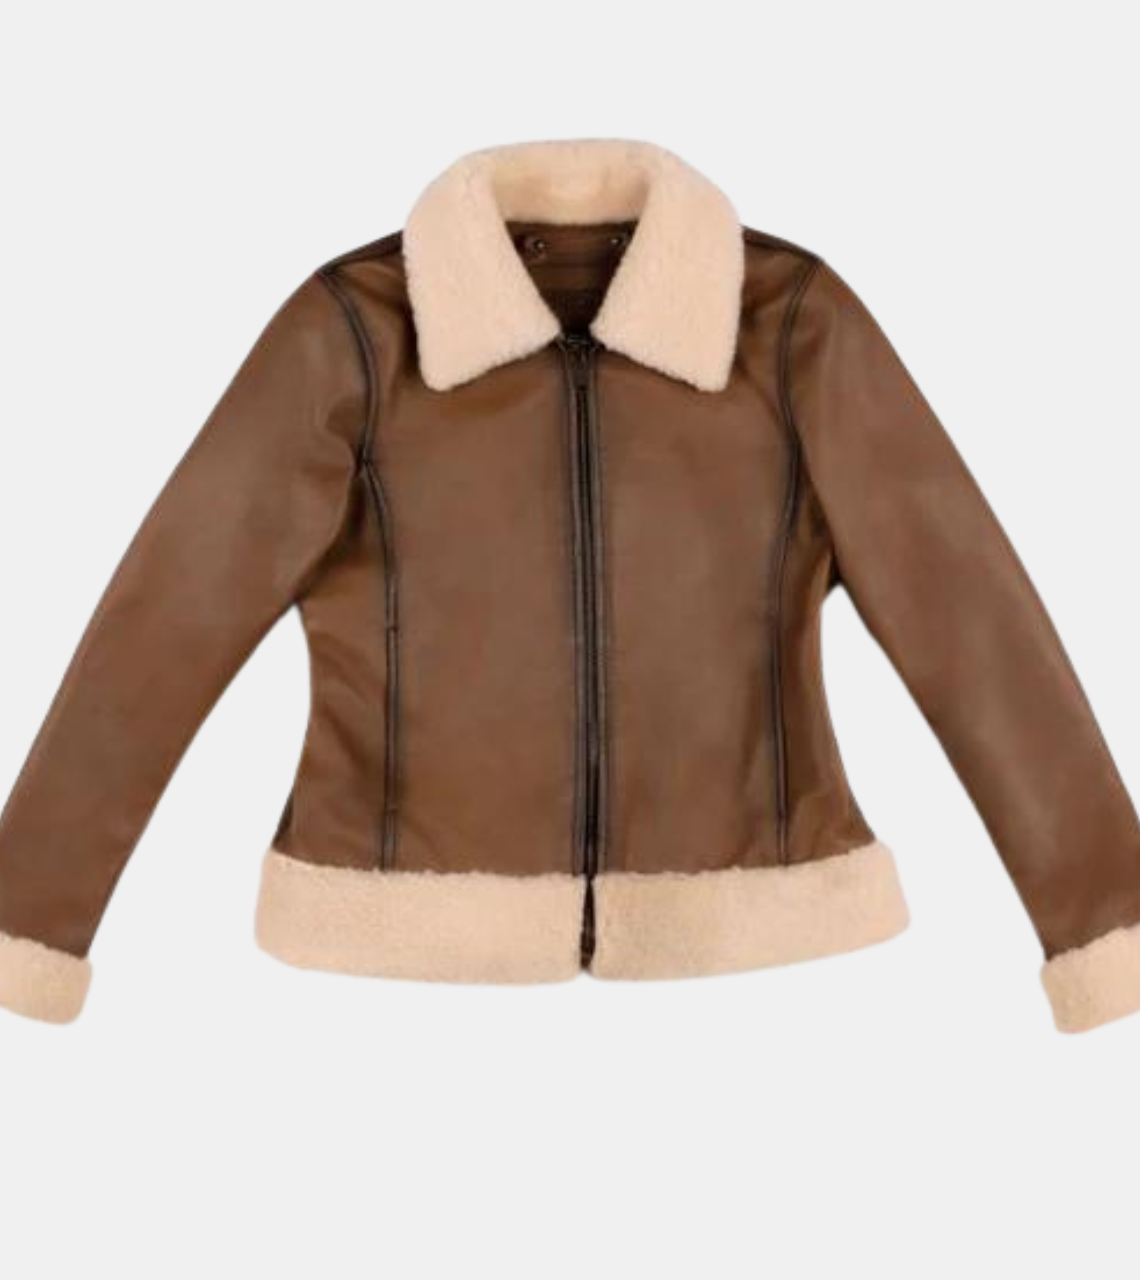 Beckett Women's Brown Shearling Leather Jacket